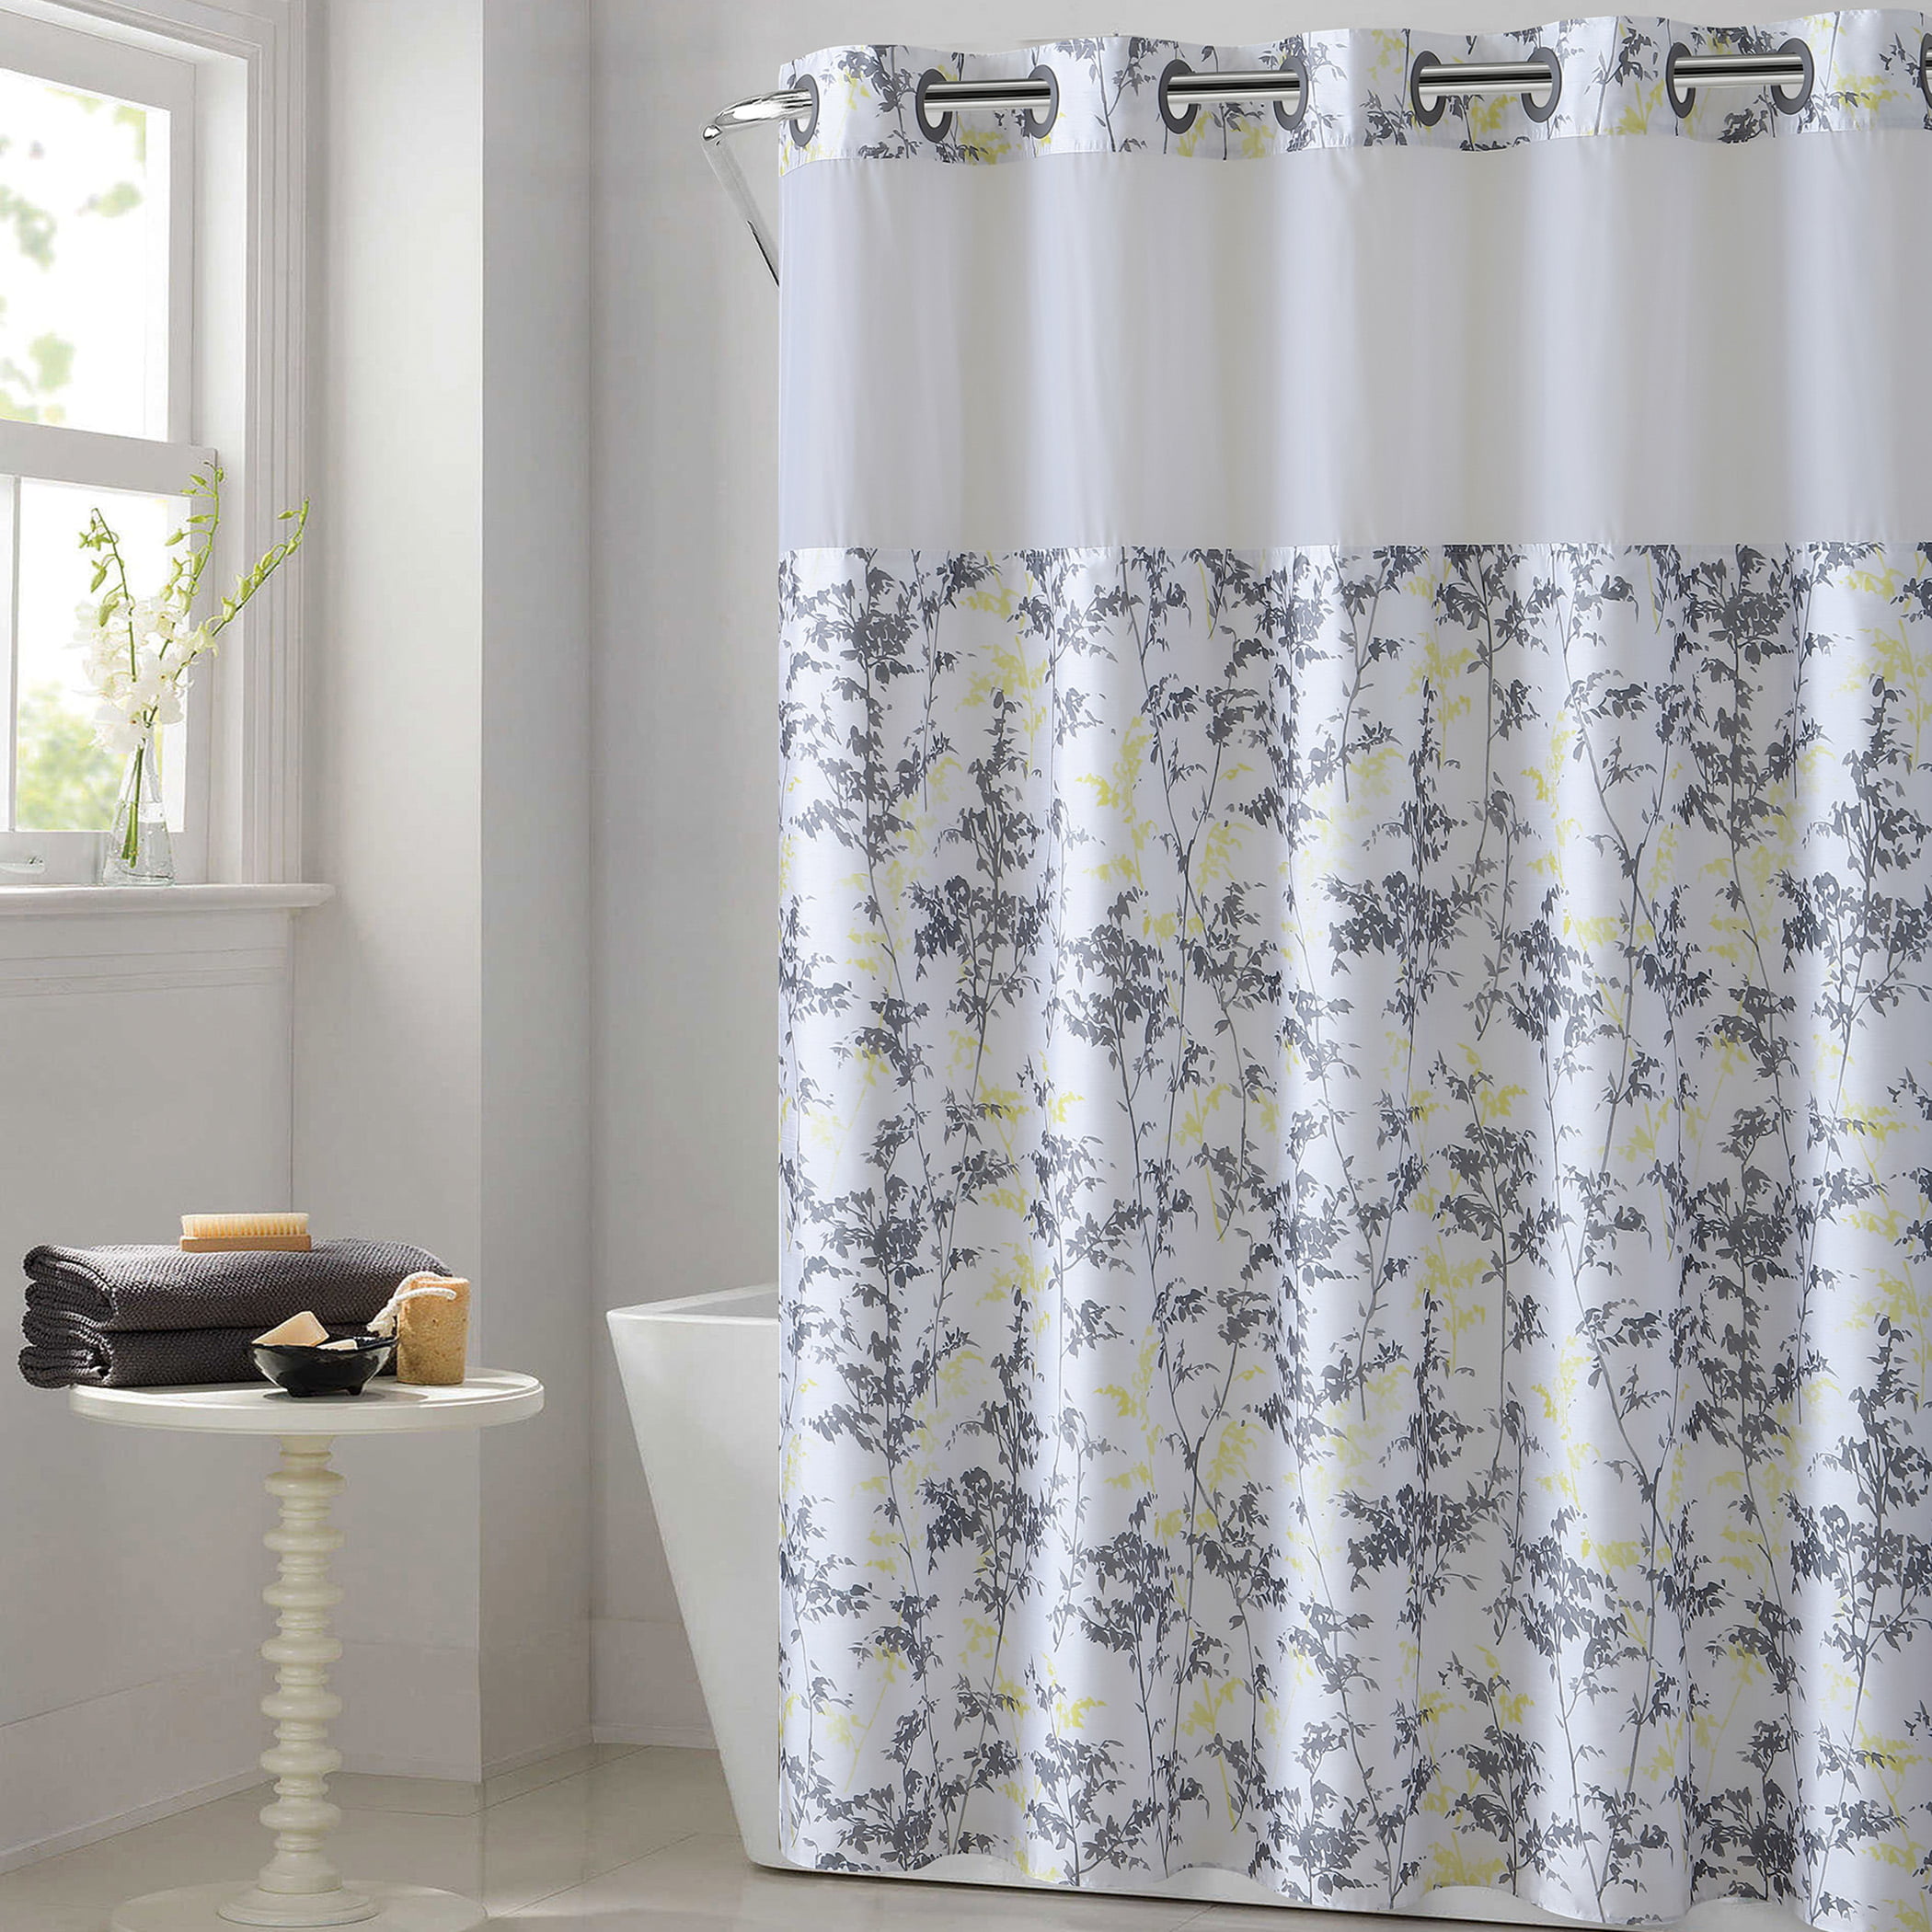 Details about   No Hooks Required Waffle Weave Shower Curtain with Snap in Liner 71W x 74H,Hot